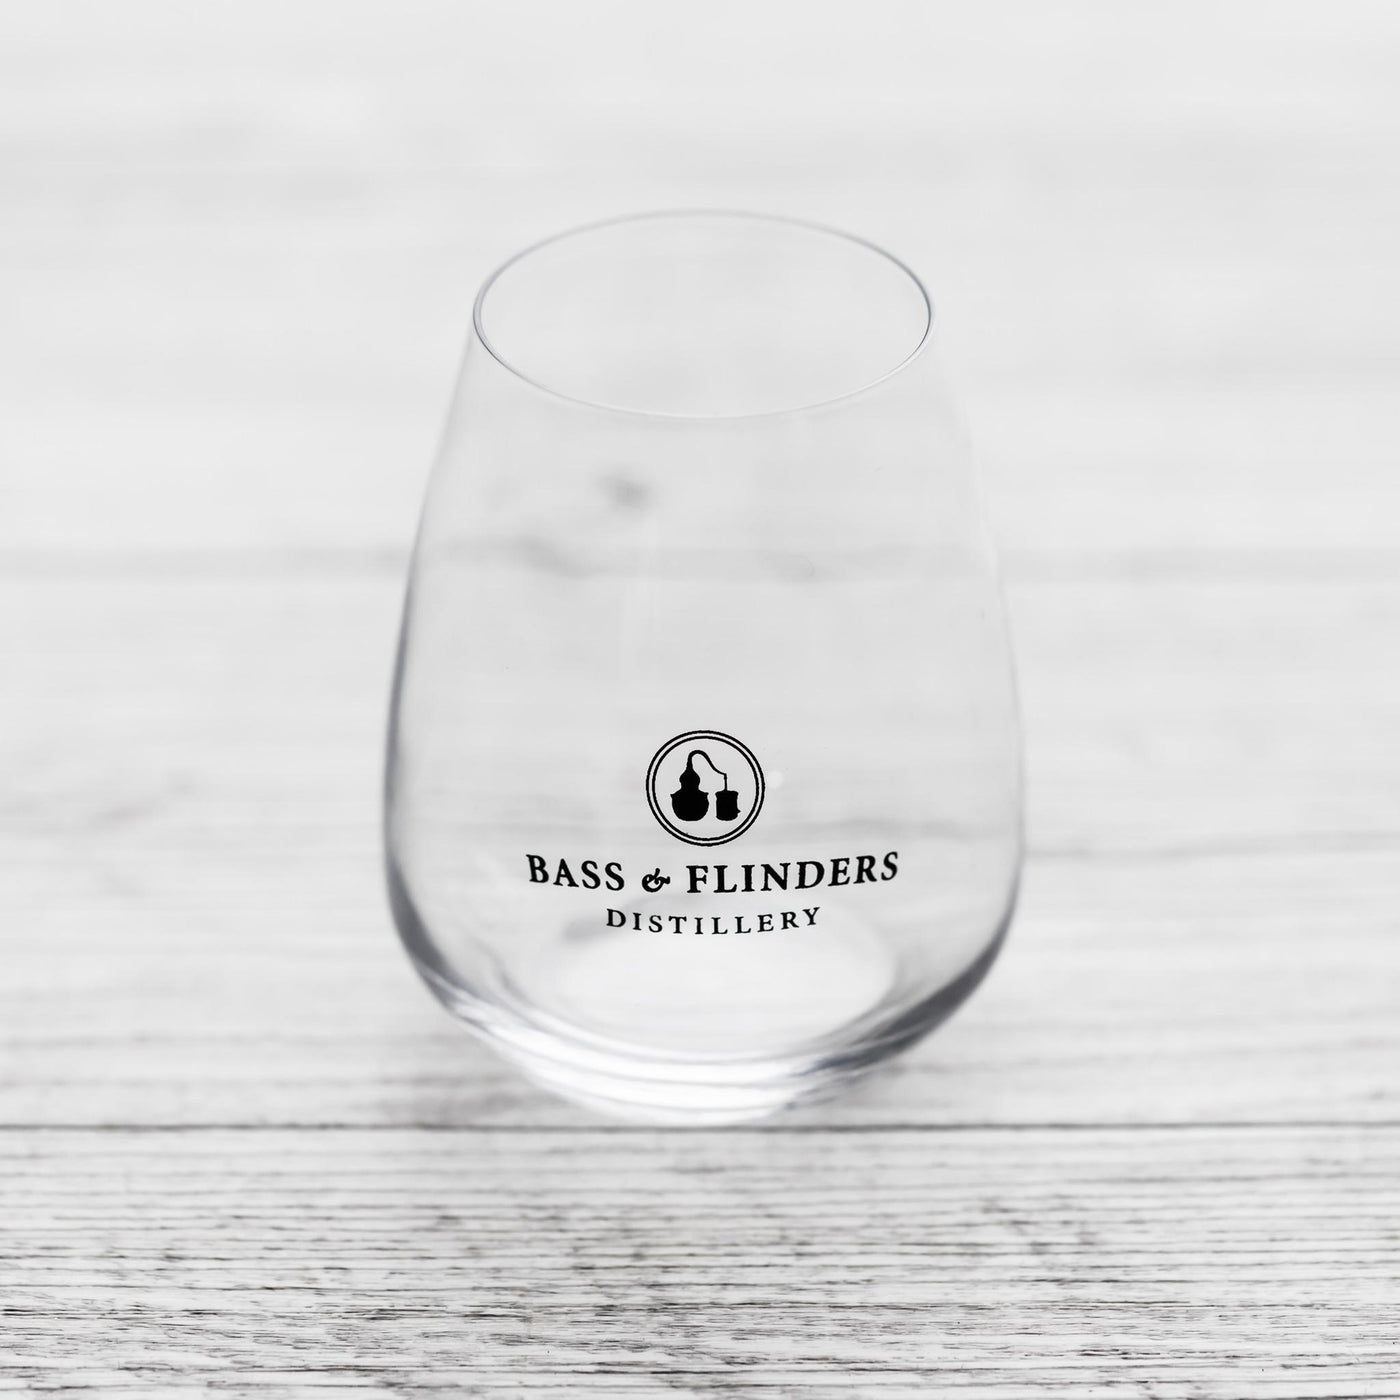 Bass & Flinders Distillery gin and tonic glass